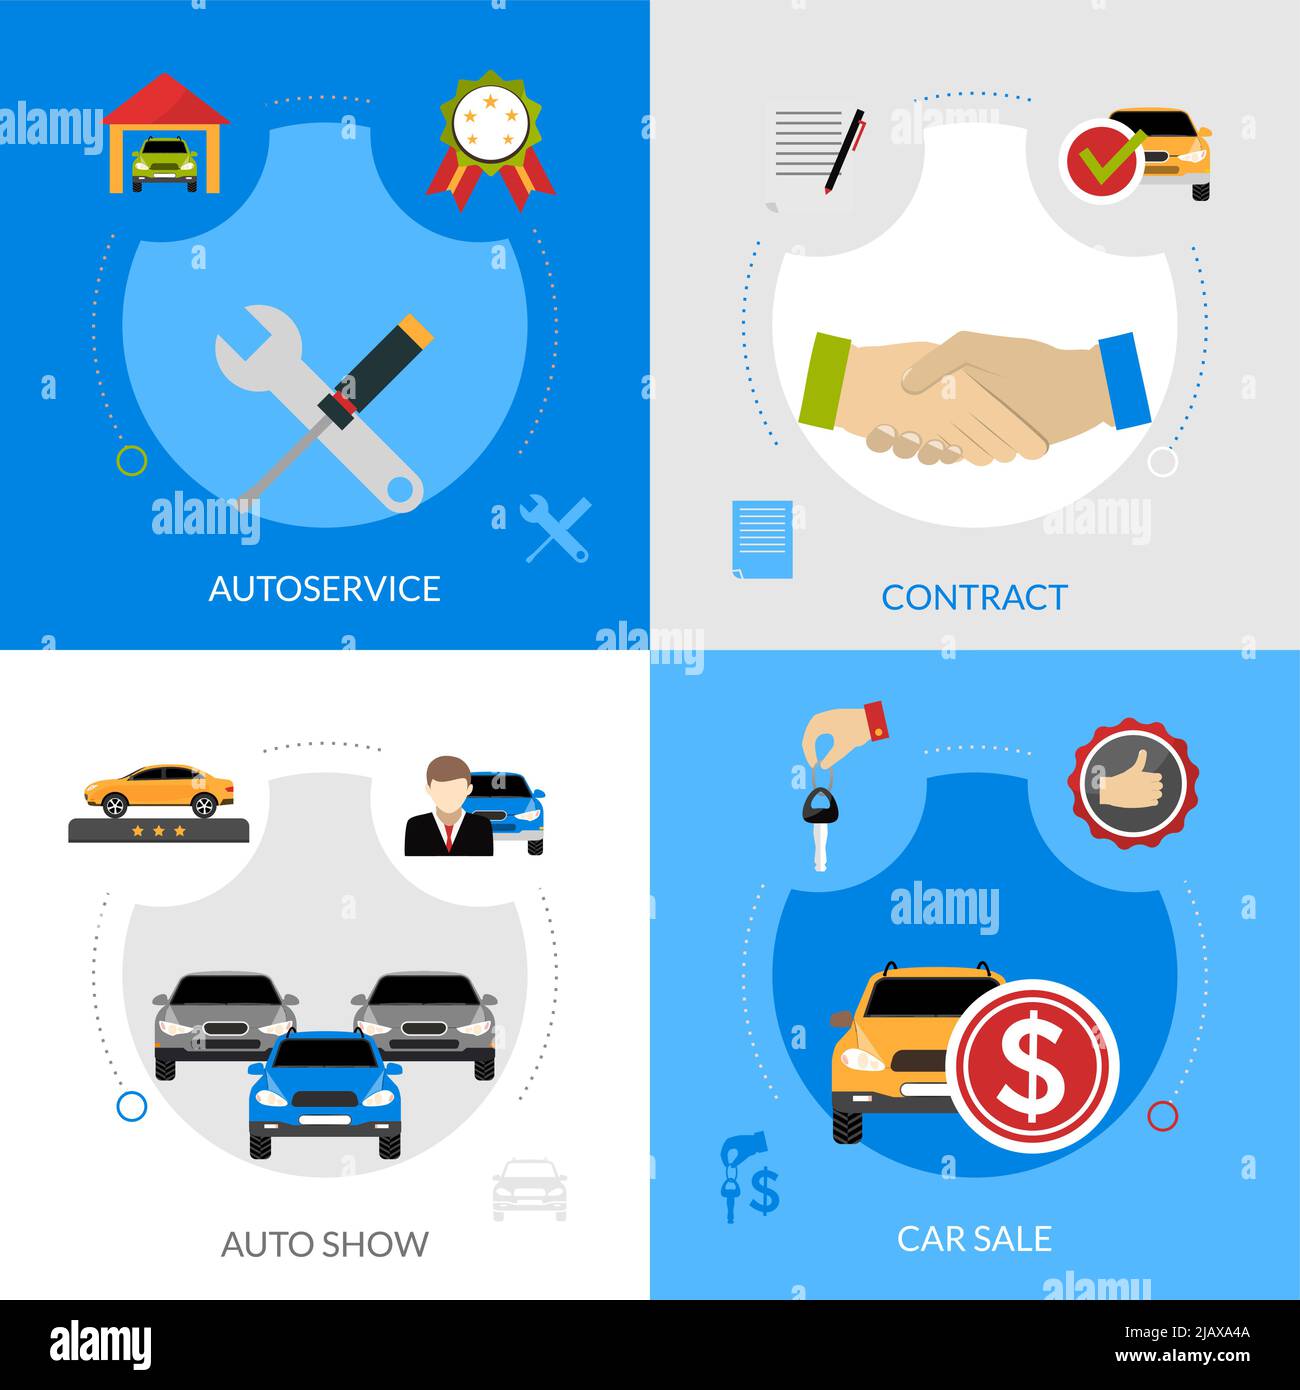 Car dealership flat icons composition of automobile sale autoservice buying contract and auto show square concept vector illustration Stock Vector